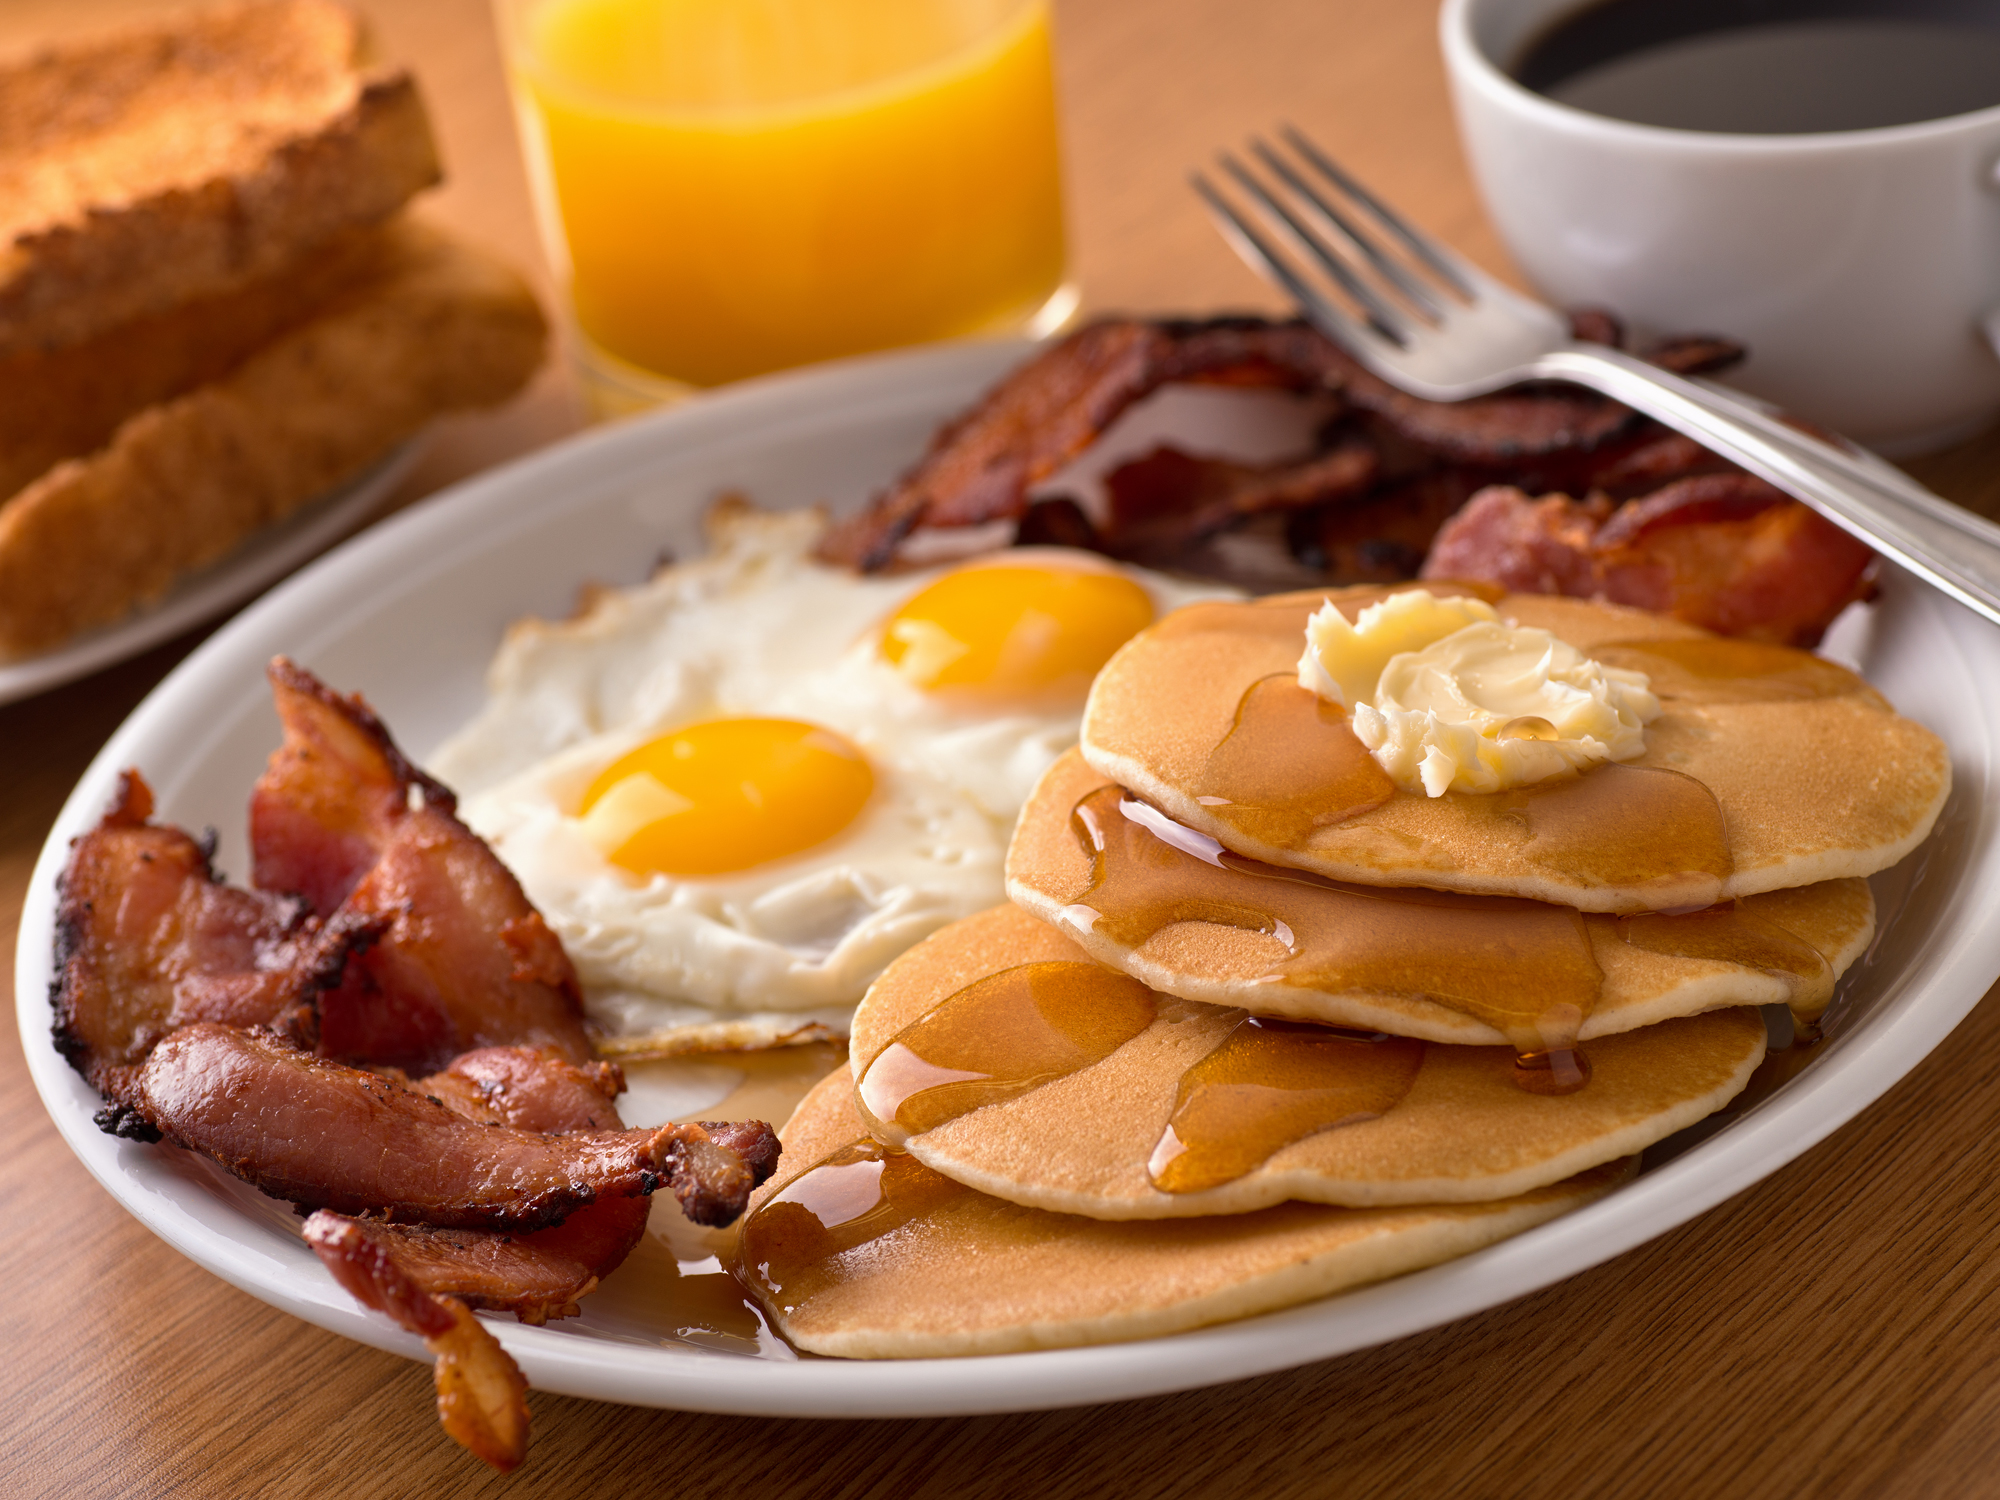 To lower BMI, BP, lipids and more: Get your breakfast on!